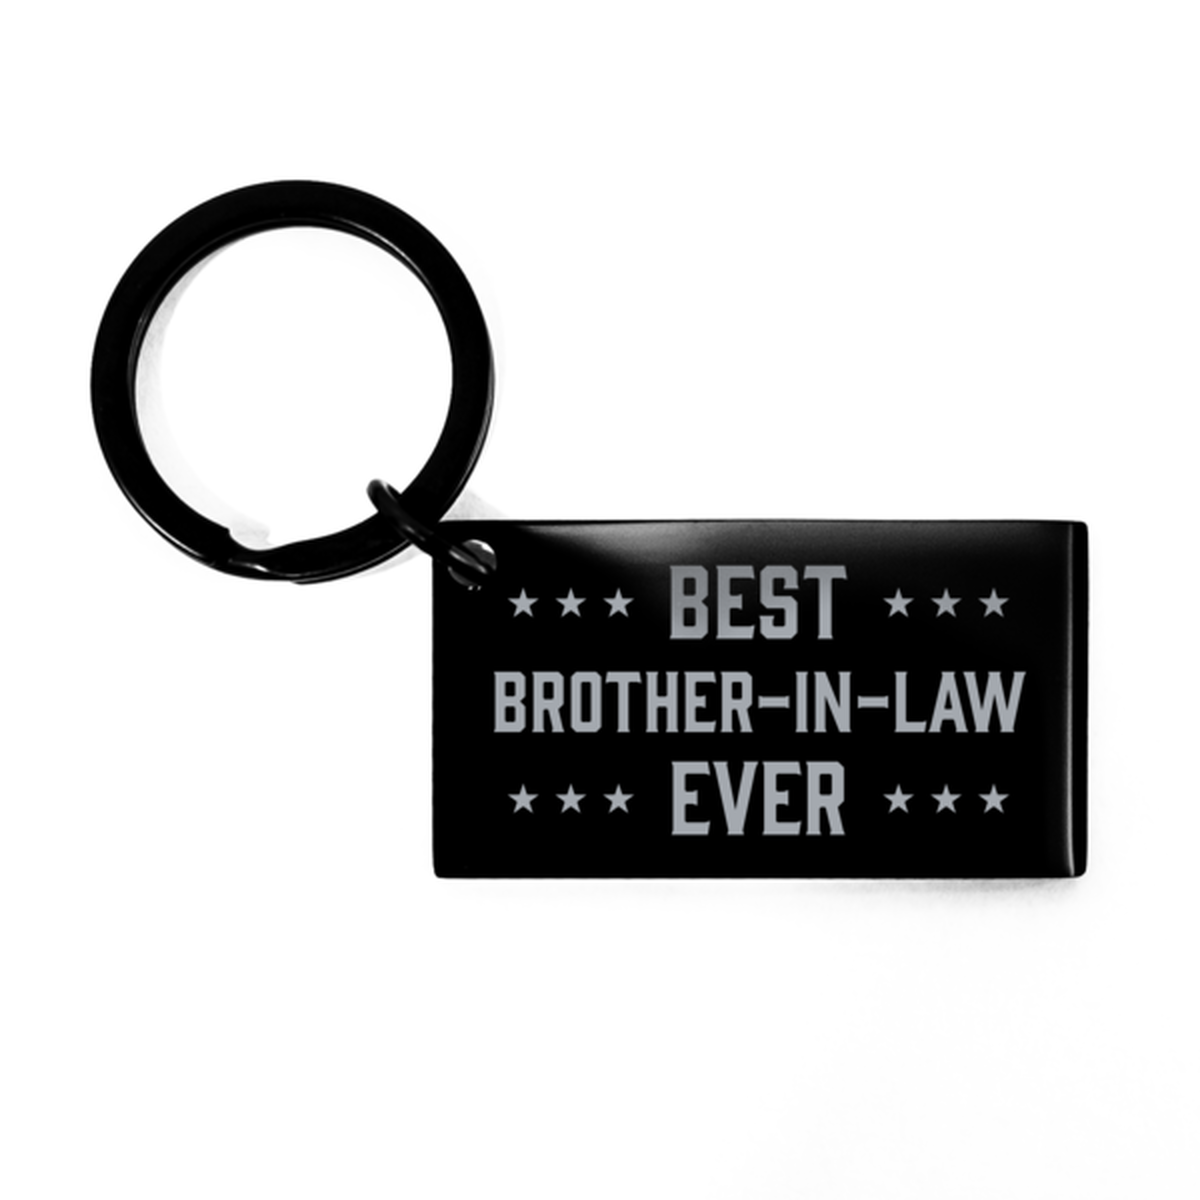 Best Brother-in-law Ever Brother-in-law Gifts, Funny Black Keychain For Brother-in-law, Birthday Engraved Keyring Presents For Men